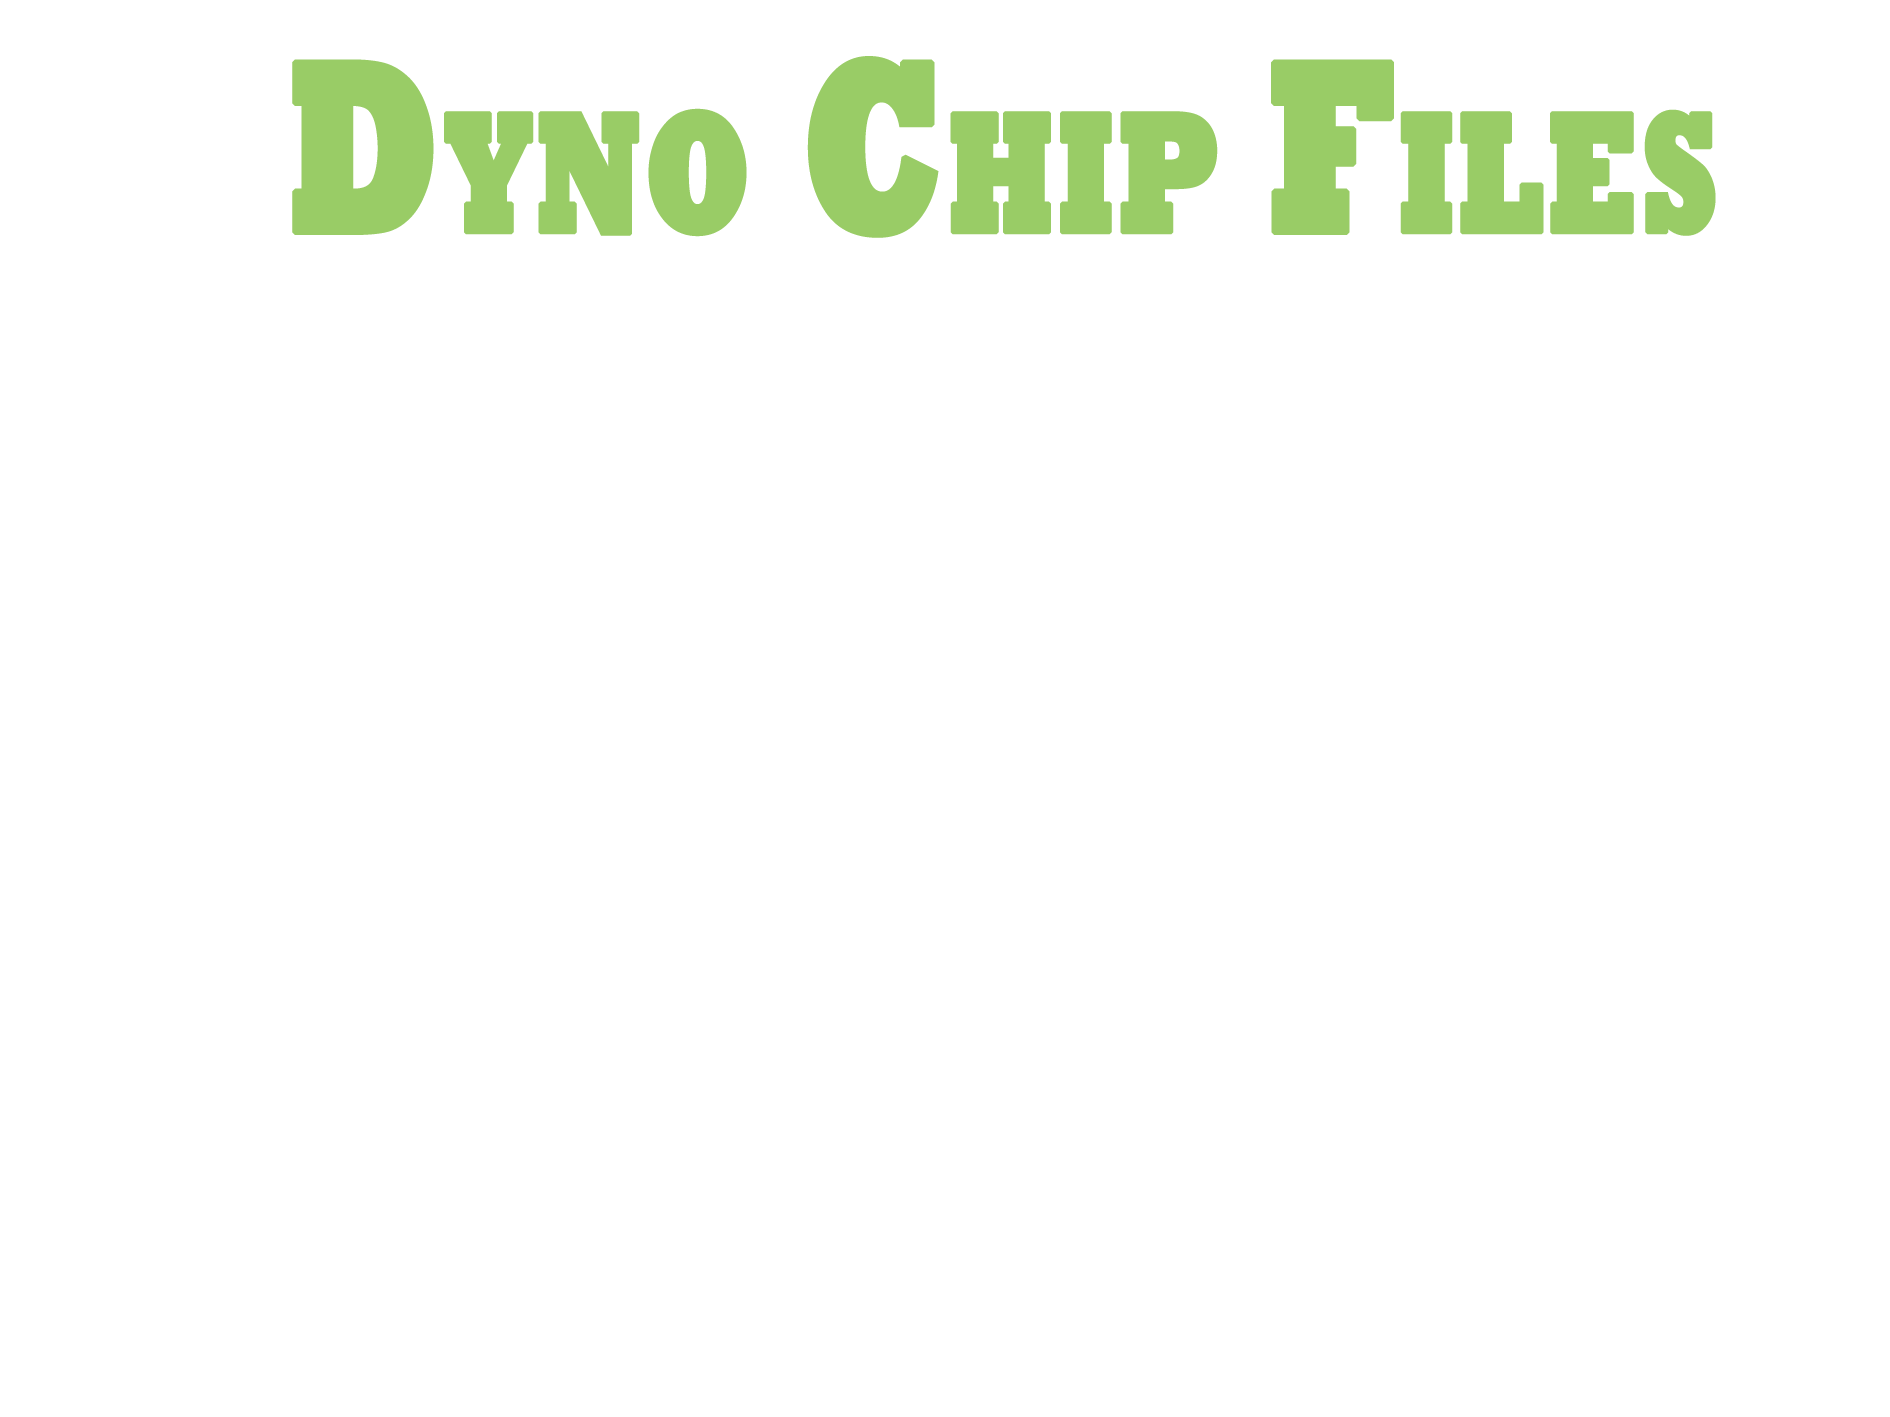 Dyno chip files - File Services